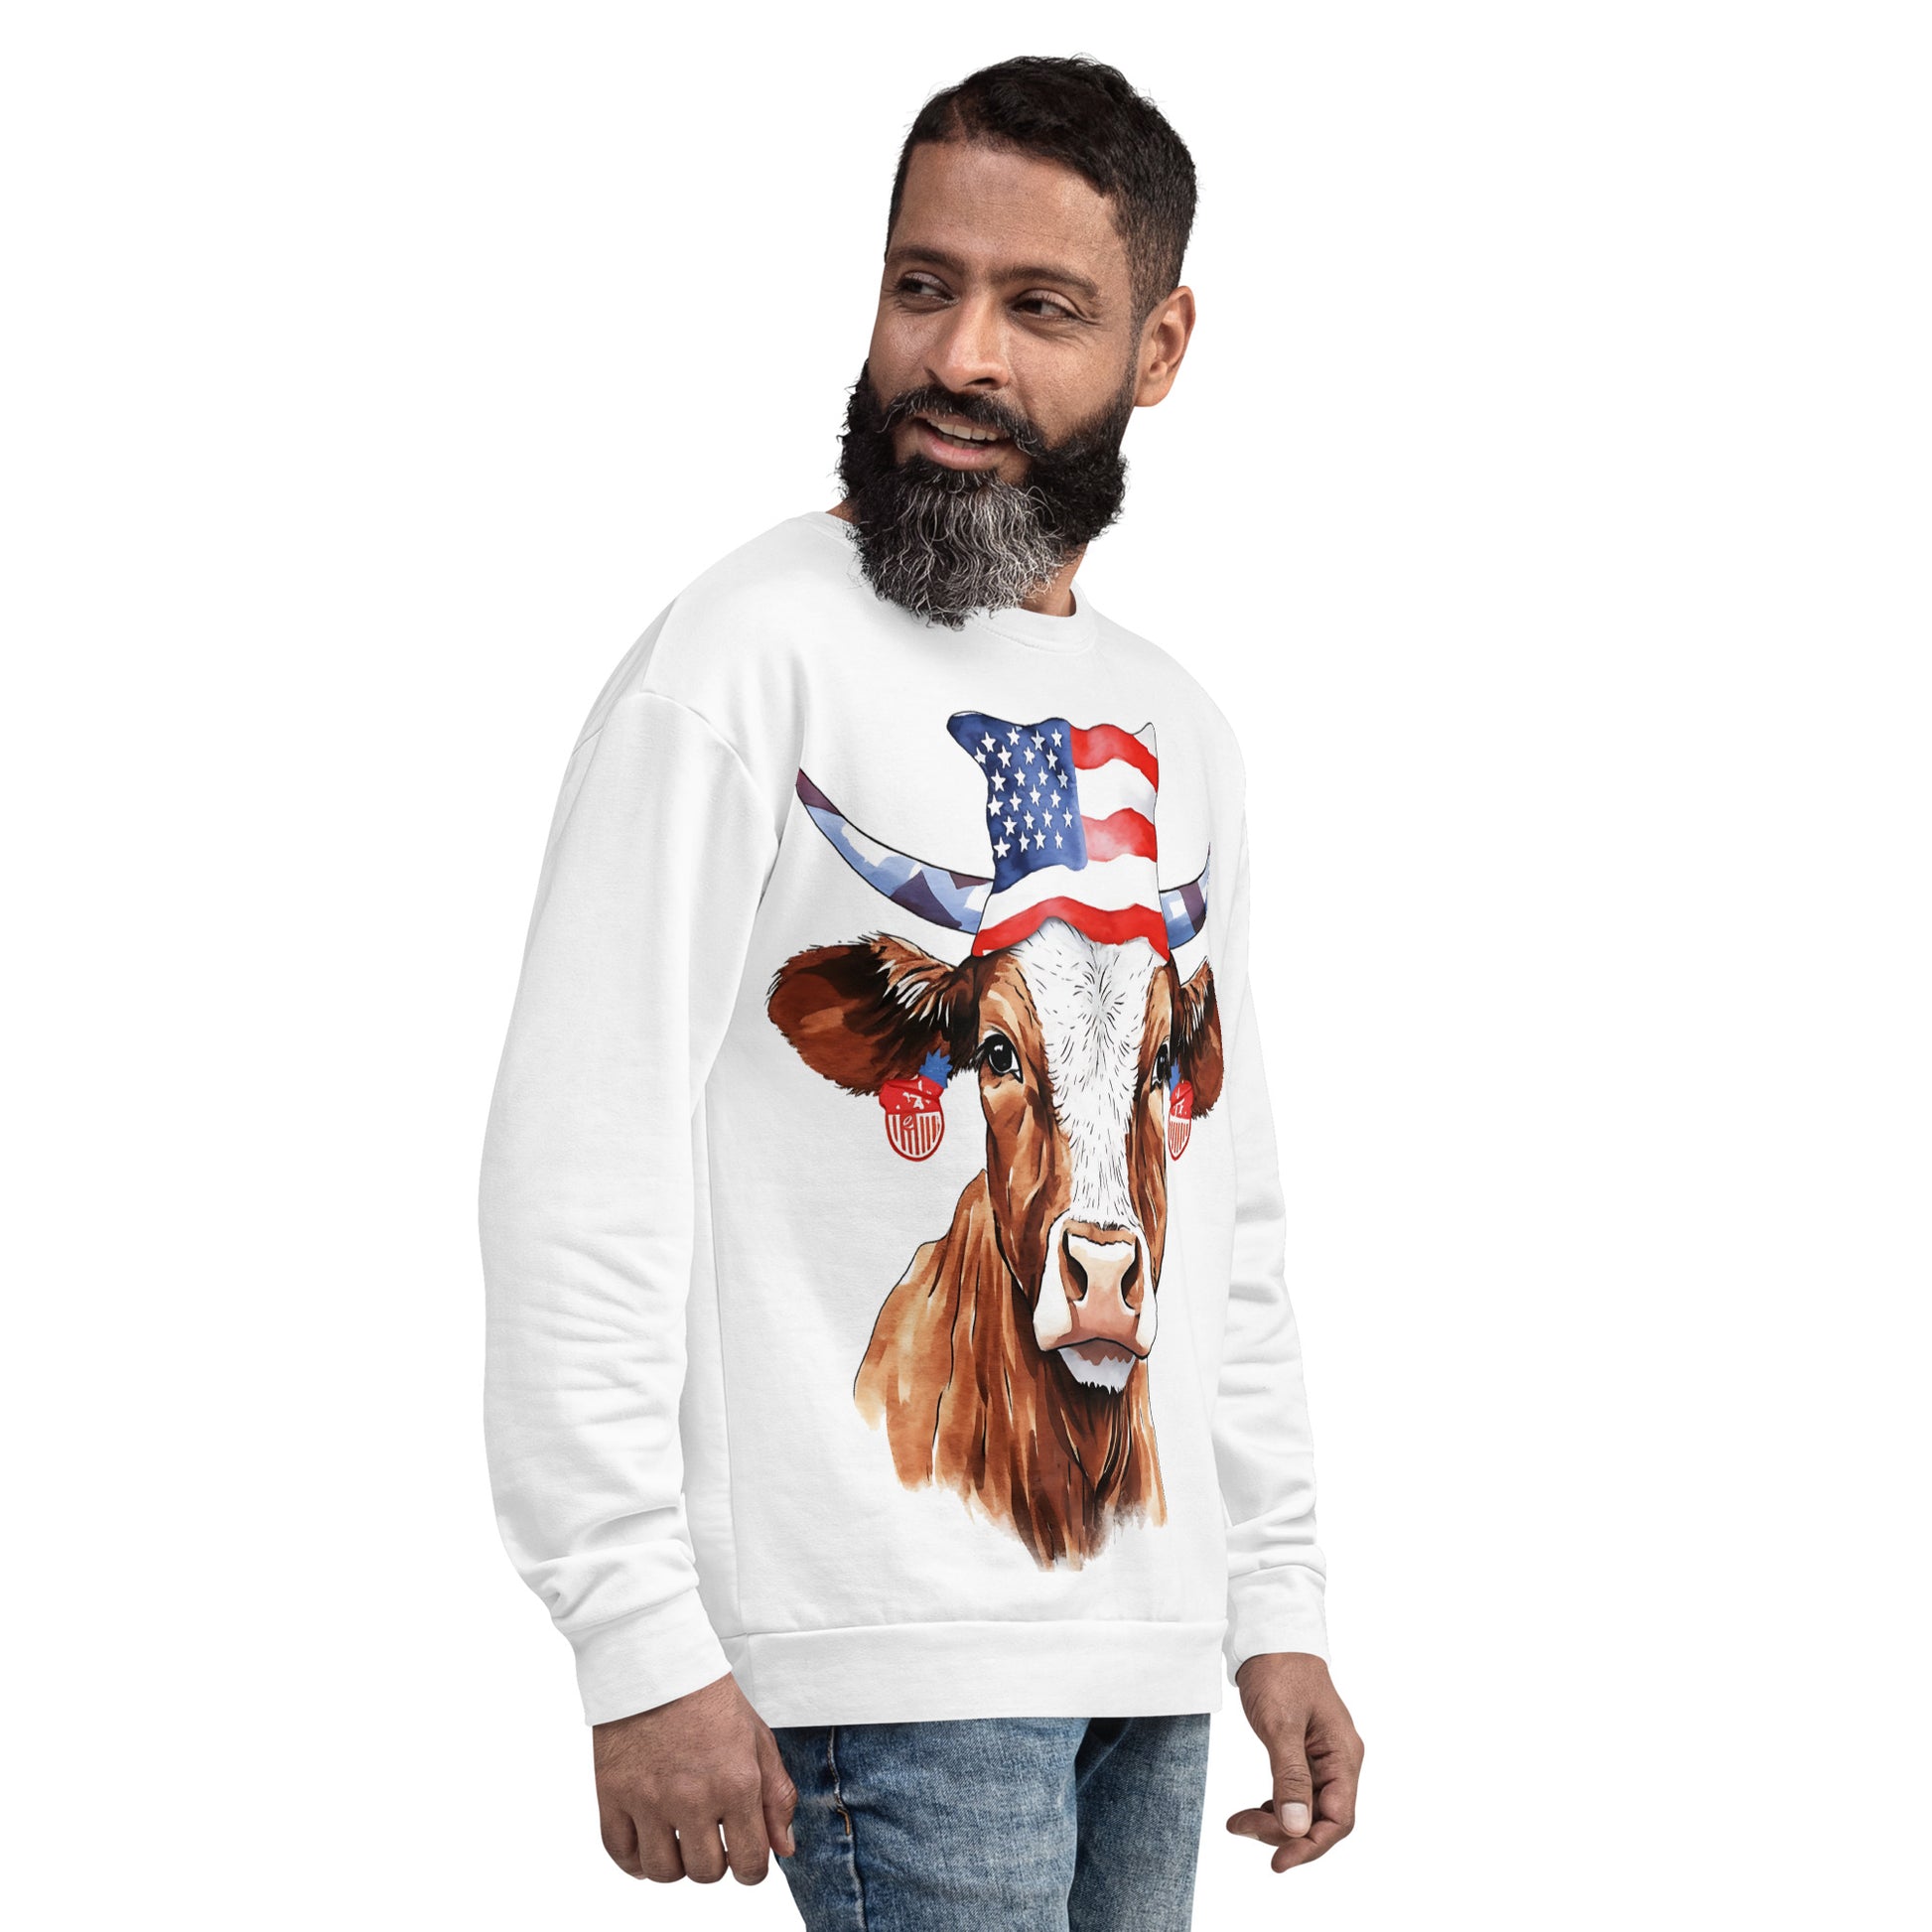 Patriotic Cow Sweatshirt For Animal Lover And Farmers